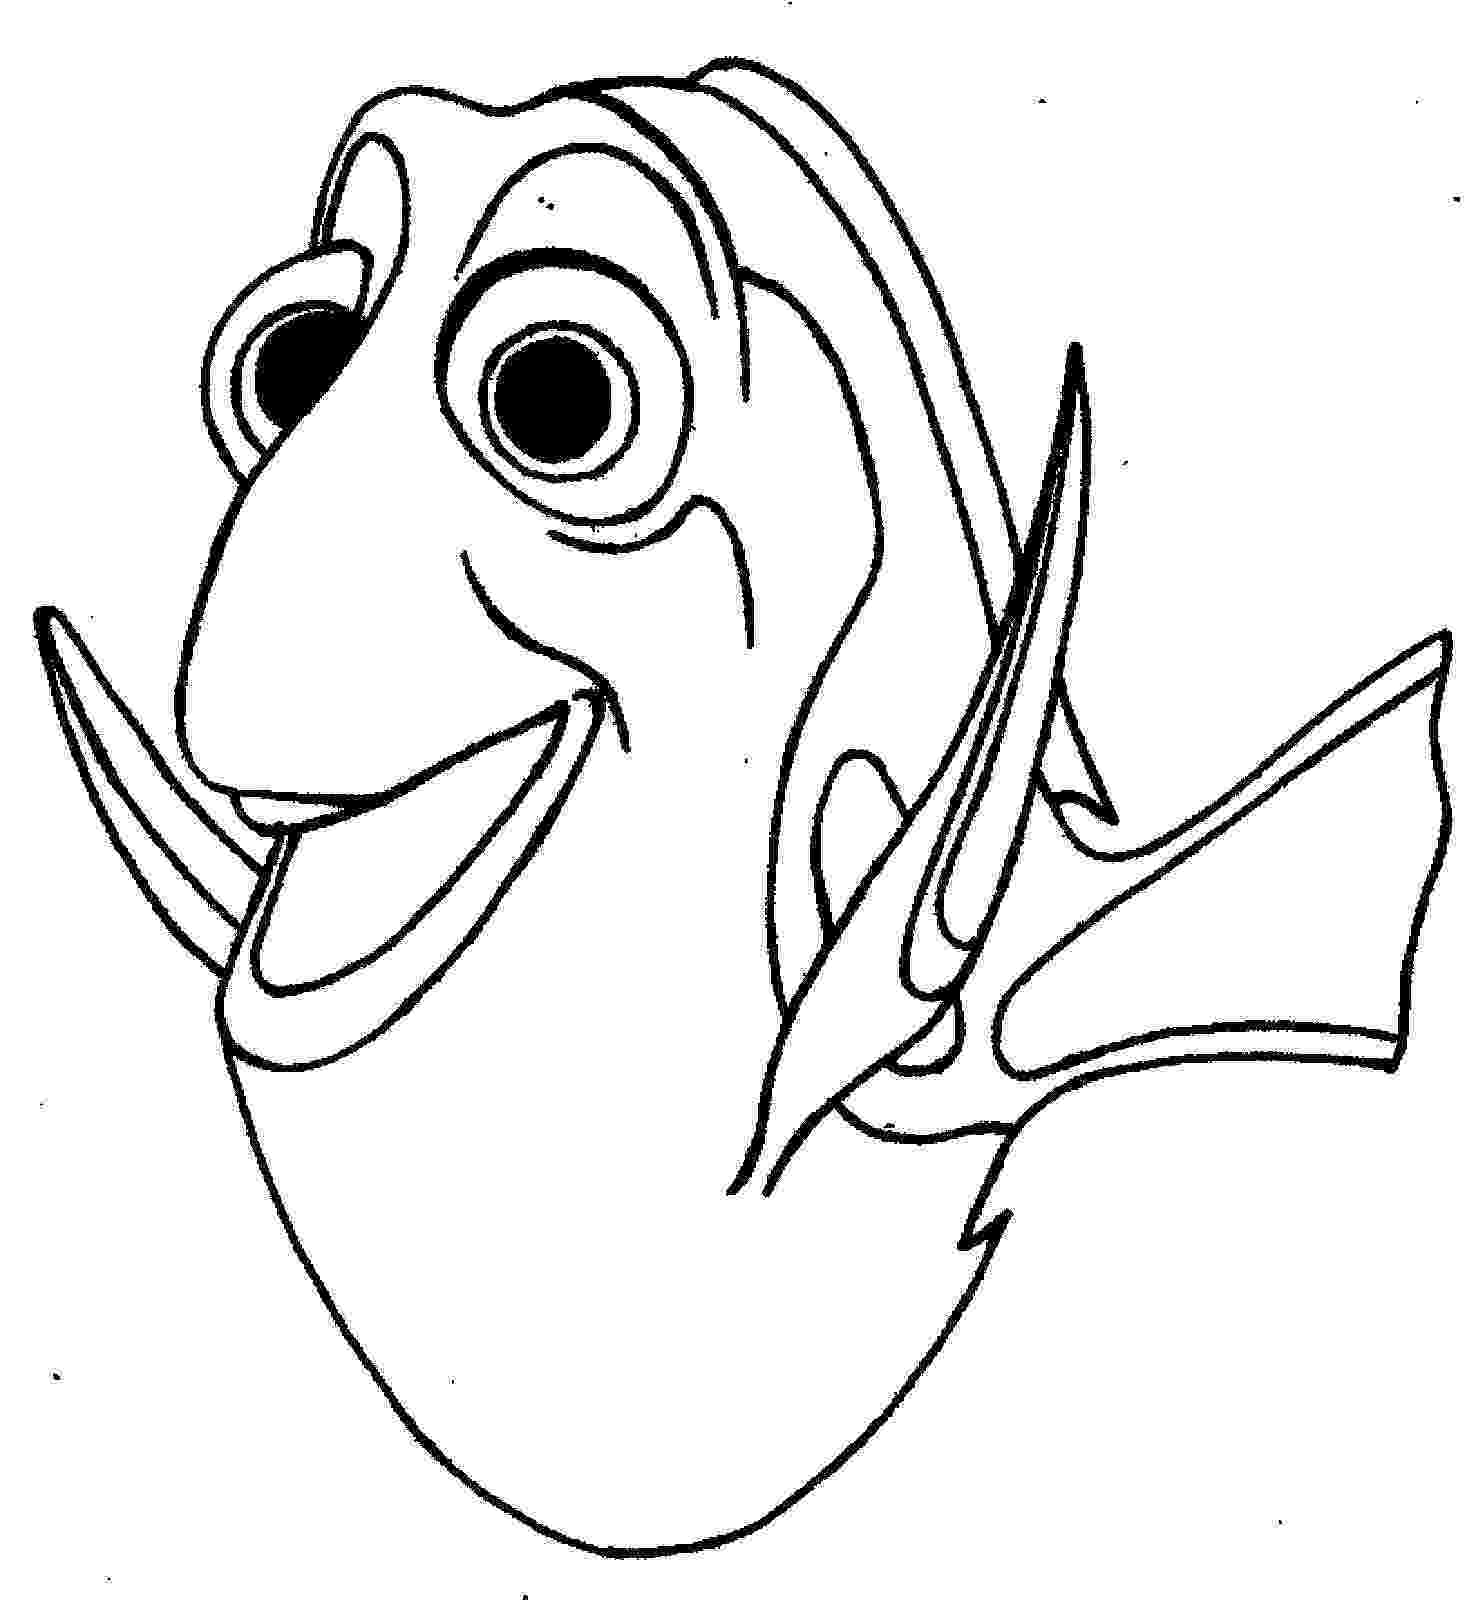 nemo coloring sheet finding nemo coloring pages to download and print for free sheet nemo coloring 